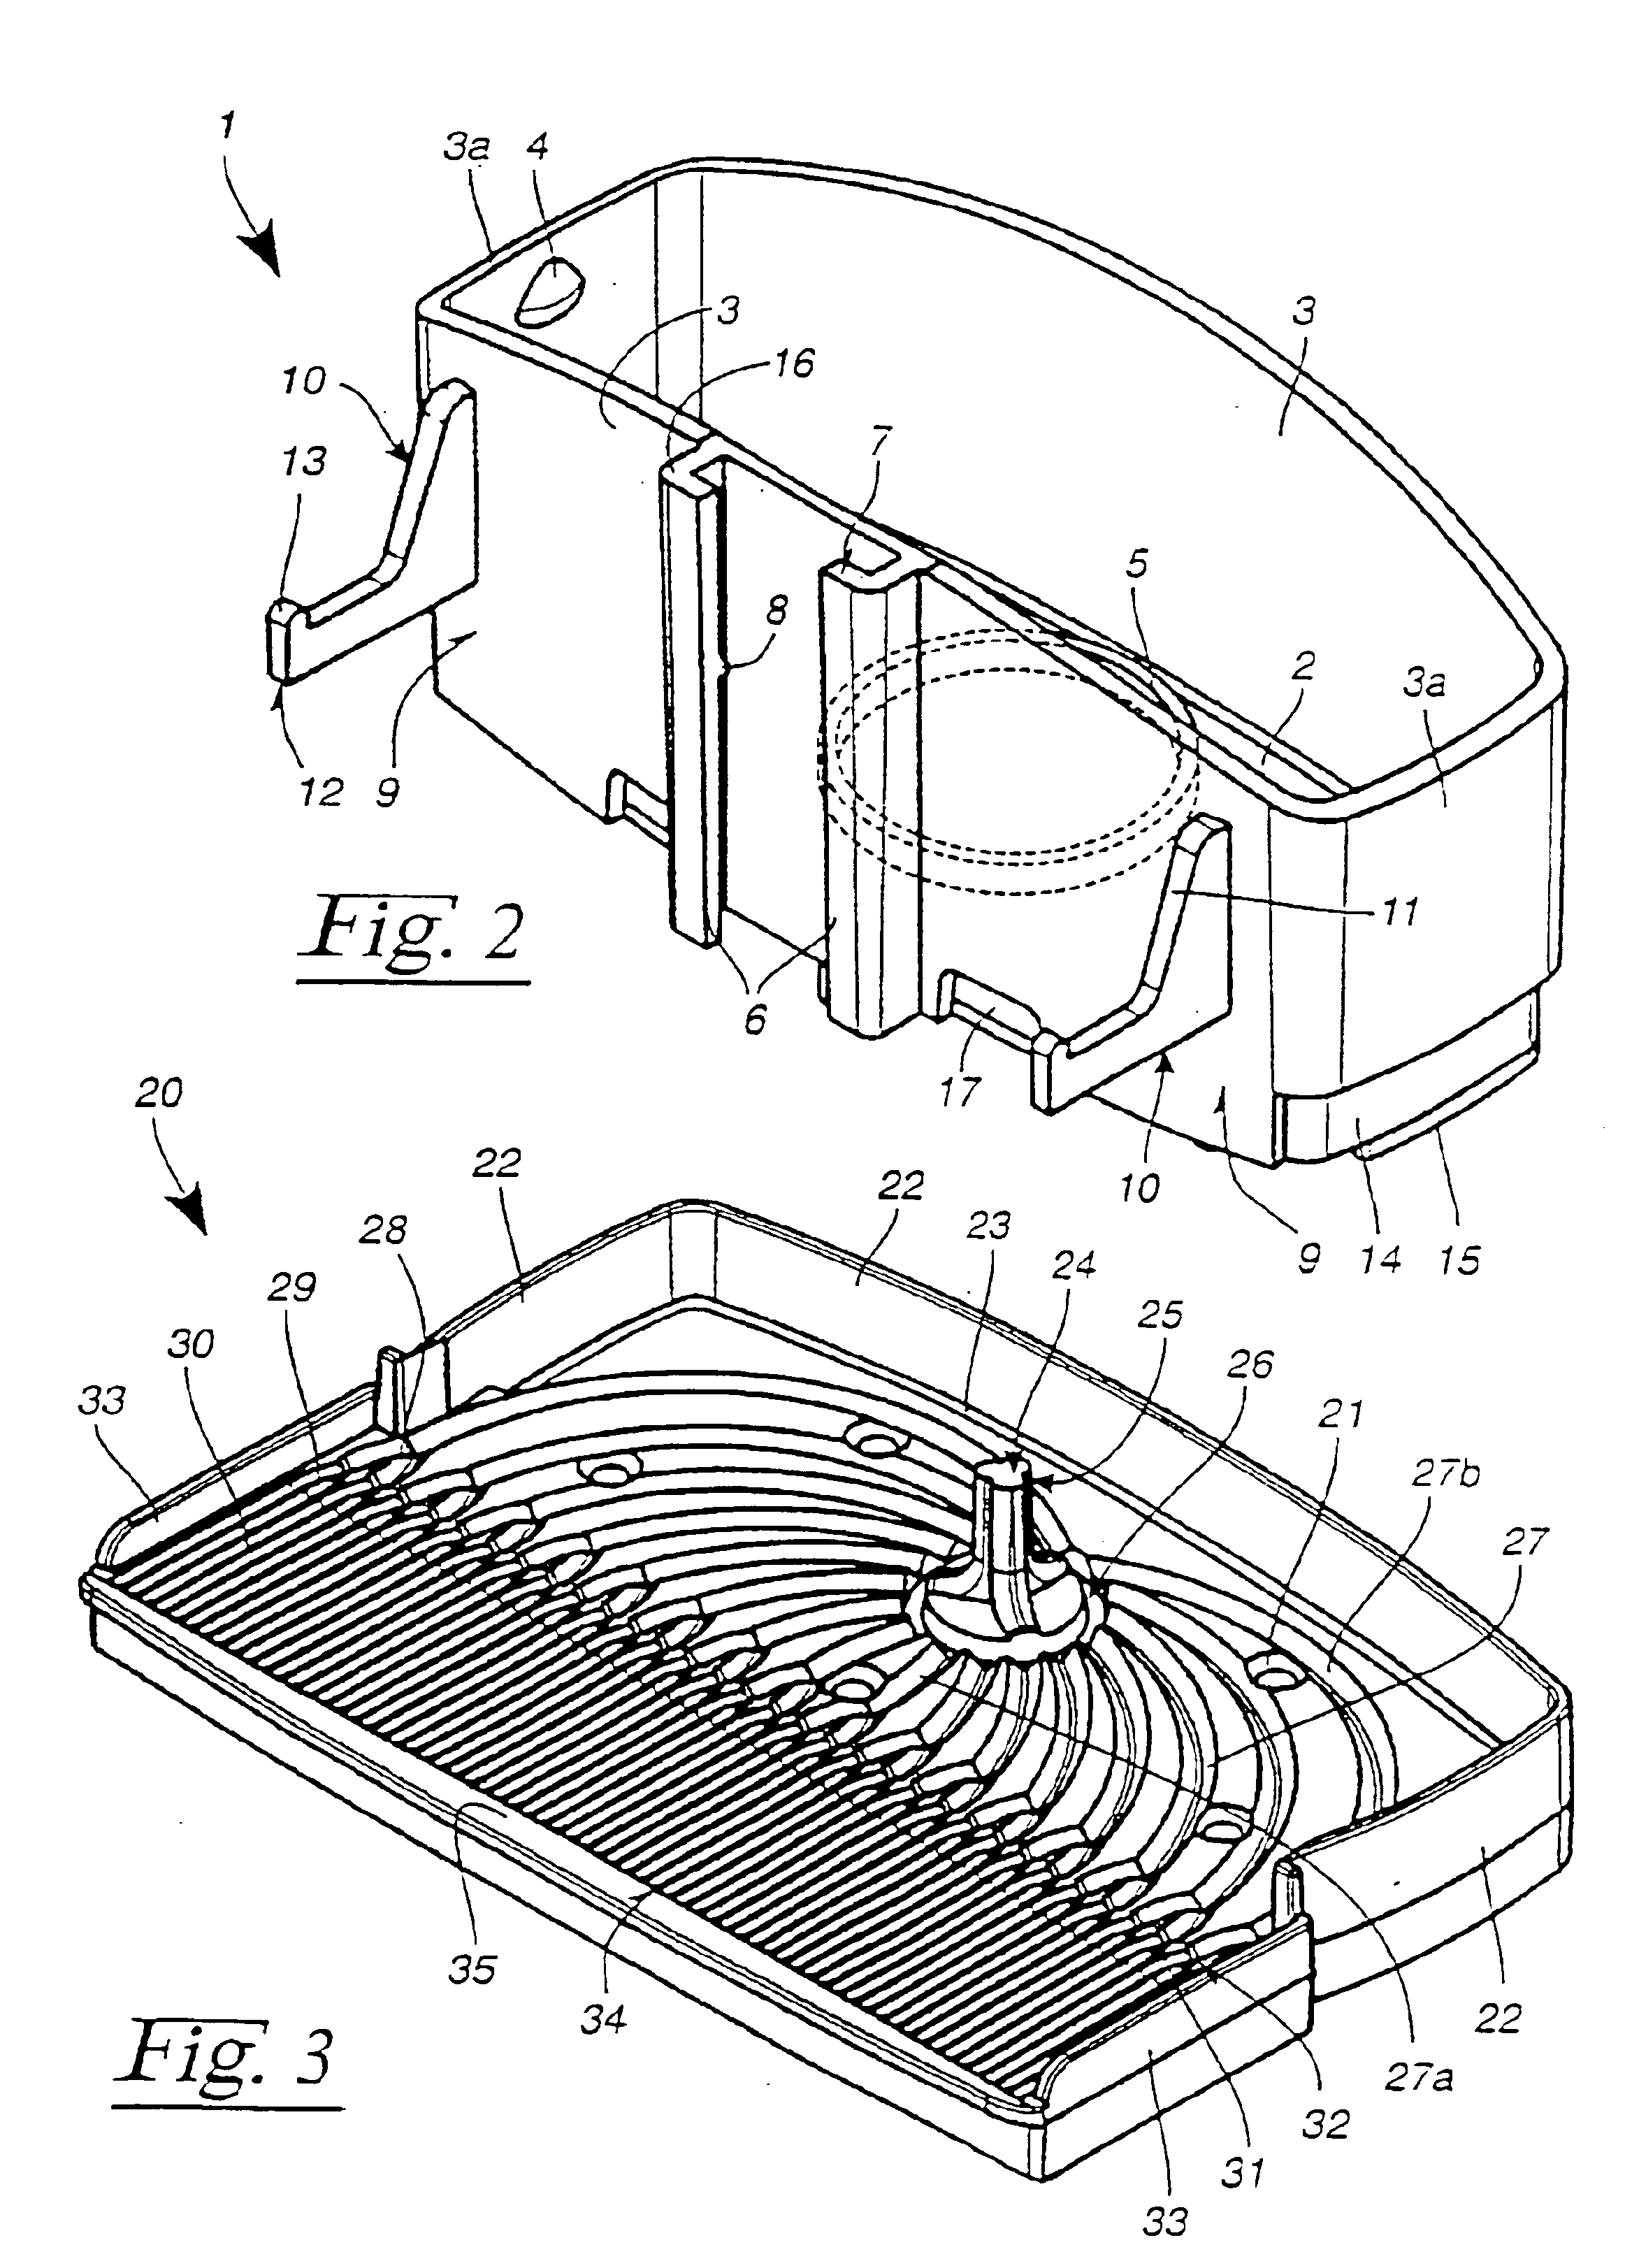 Device for dispensing a liquid active substance